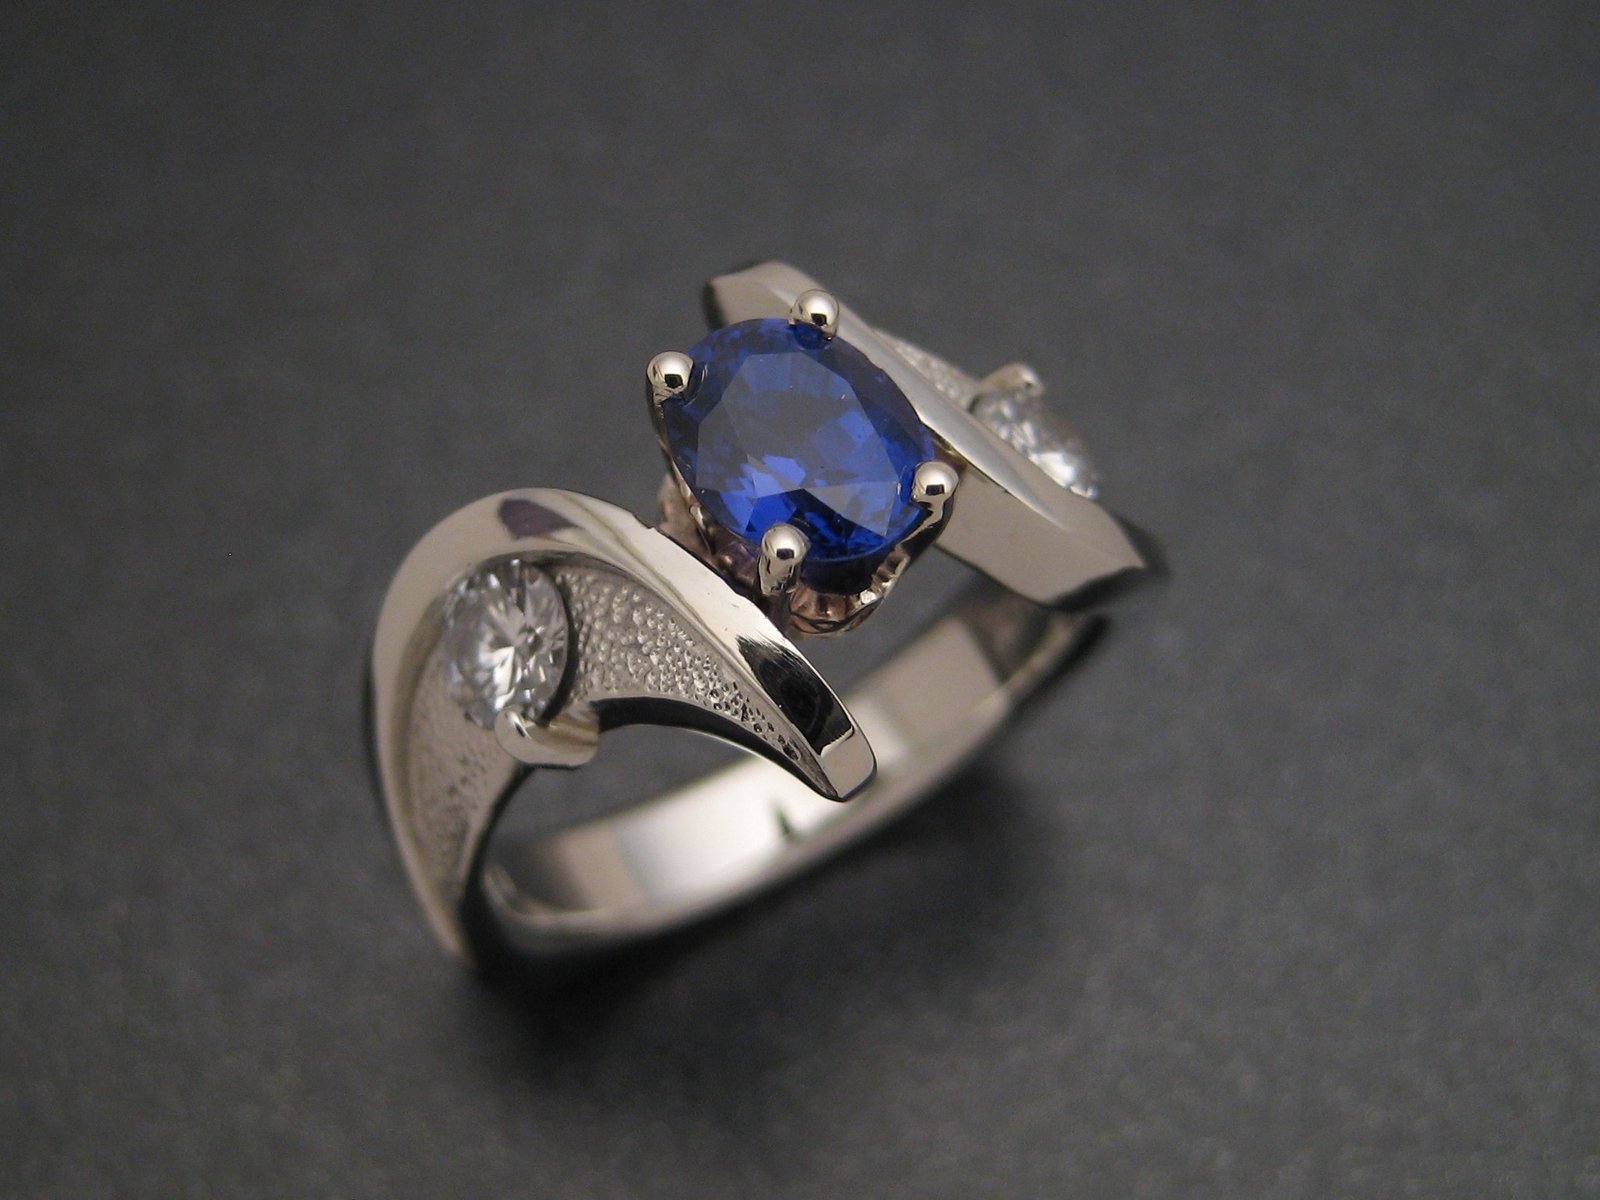 Sapphire Wedding Ring by Sculpted Jewelry Designs at CustomMade.com